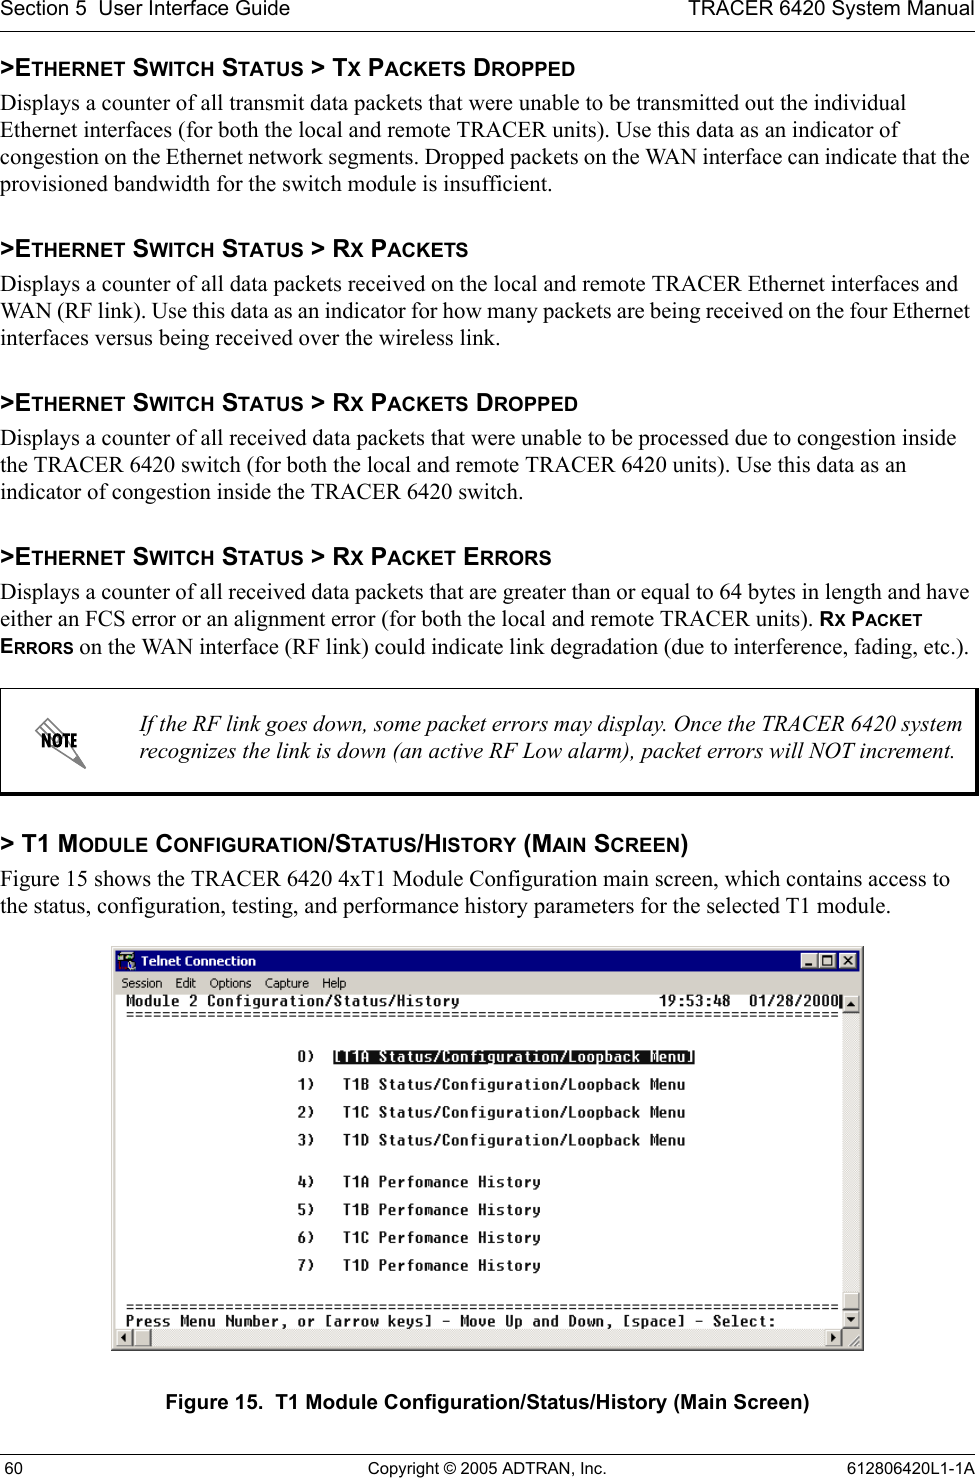 Section 5  User Interface Guide TRACER 6420 System Manual 60 Copyright © 2005 ADTRAN, Inc. 612806420L1-1A&gt;ETHERNET SWITCH STATUS &gt; TX PACKETS DROPPEDDisplays a counter of all transmit data packets that were unable to be transmitted out the individual Ethernet interfaces (for both the local and remote TRACER units). Use this data as an indicator of congestion on the Ethernet network segments. Dropped packets on the WAN interface can indicate that the provisioned bandwidth for the switch module is insufficient.&gt;ETHERNET SWITCH STATUS &gt; RX PACKETSDisplays a counter of all data packets received on the local and remote TRACER Ethernet interfaces and WAN (RF link). Use this data as an indicator for how many packets are being received on the four Ethernet interfaces versus being received over the wireless link.&gt;ETHERNET SWITCH STATUS &gt; RX PACKETS DROPPEDDisplays a counter of all received data packets that were unable to be processed due to congestion inside the TRACER 6420 switch (for both the local and remote TRACER 6420 units). Use this data as an indicator of congestion inside the TRACER 6420 switch. &gt;ETHERNET SWITCH STATUS &gt; RX PACKET ERRORSDisplays a counter of all received data packets that are greater than or equal to 64 bytes in length and have either an FCS error or an alignment error (for both the local and remote TRACER units). RX PACKET ERRORS on the WAN interface (RF link) could indicate link degradation (due to interference, fading, etc.). &gt; T1 MODULE CONFIGURATION/STATUS/HISTORY (MAIN SCREEN)Figure 15 shows the TRACER 6420 4xT1 Module Configuration main screen, which contains access to the status, configuration, testing, and performance history parameters for the selected T1 module.Figure 15.  T1 Module Configuration/Status/History (Main Screen)If the RF link goes down, some packet errors may display. Once the TRACER 6420 system recognizes the link is down (an active RF Low alarm), packet errors will NOT increment.